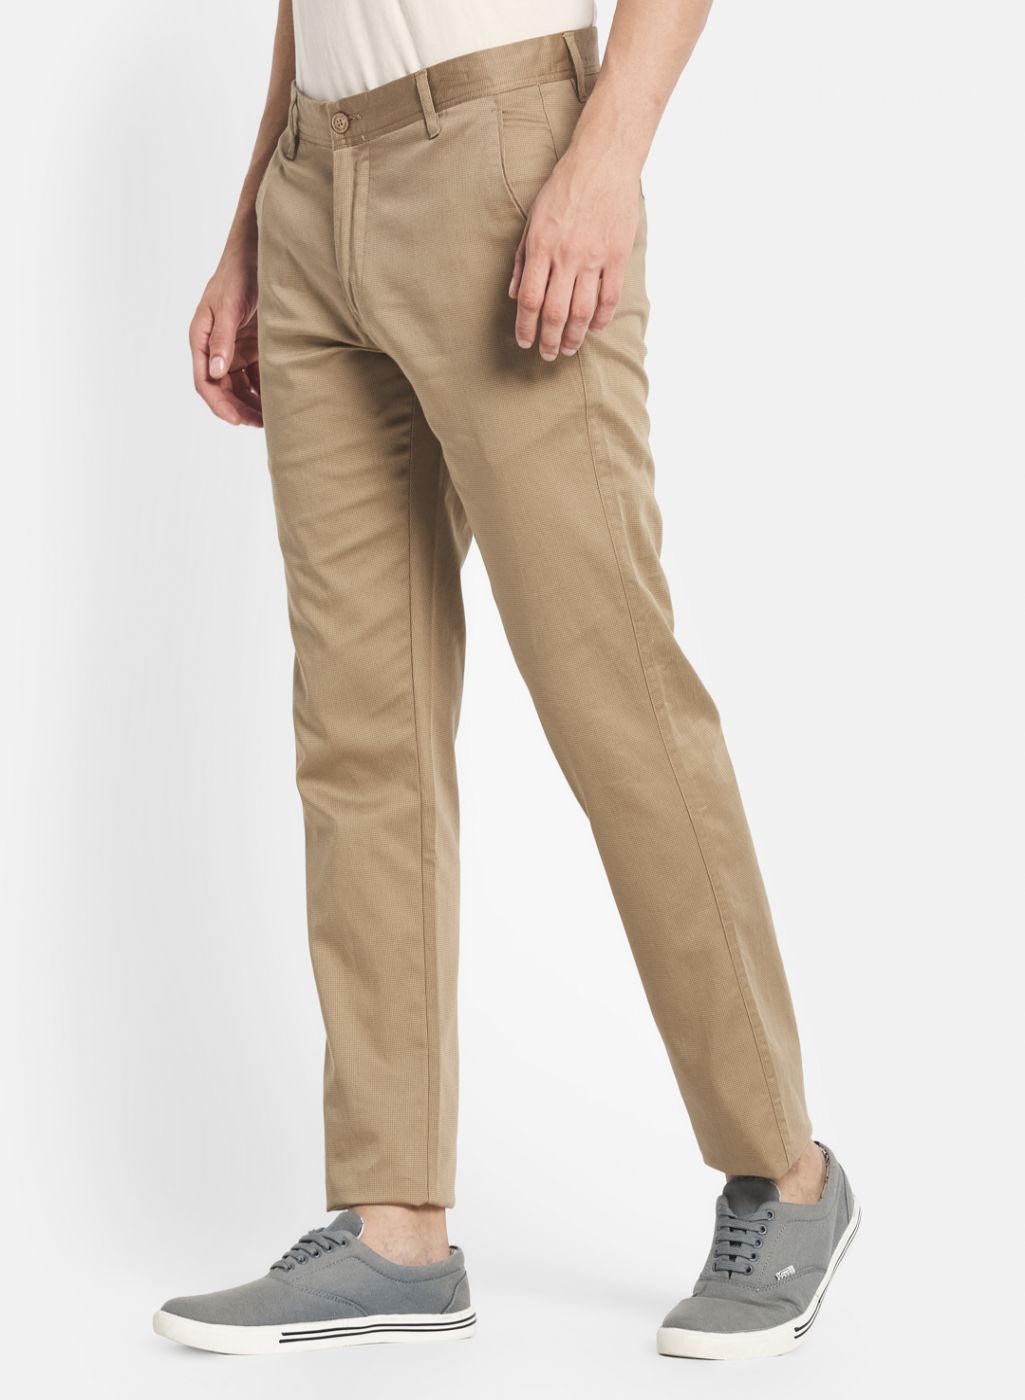 Monte Carlo Olive Cotton Regular Fit Trousers